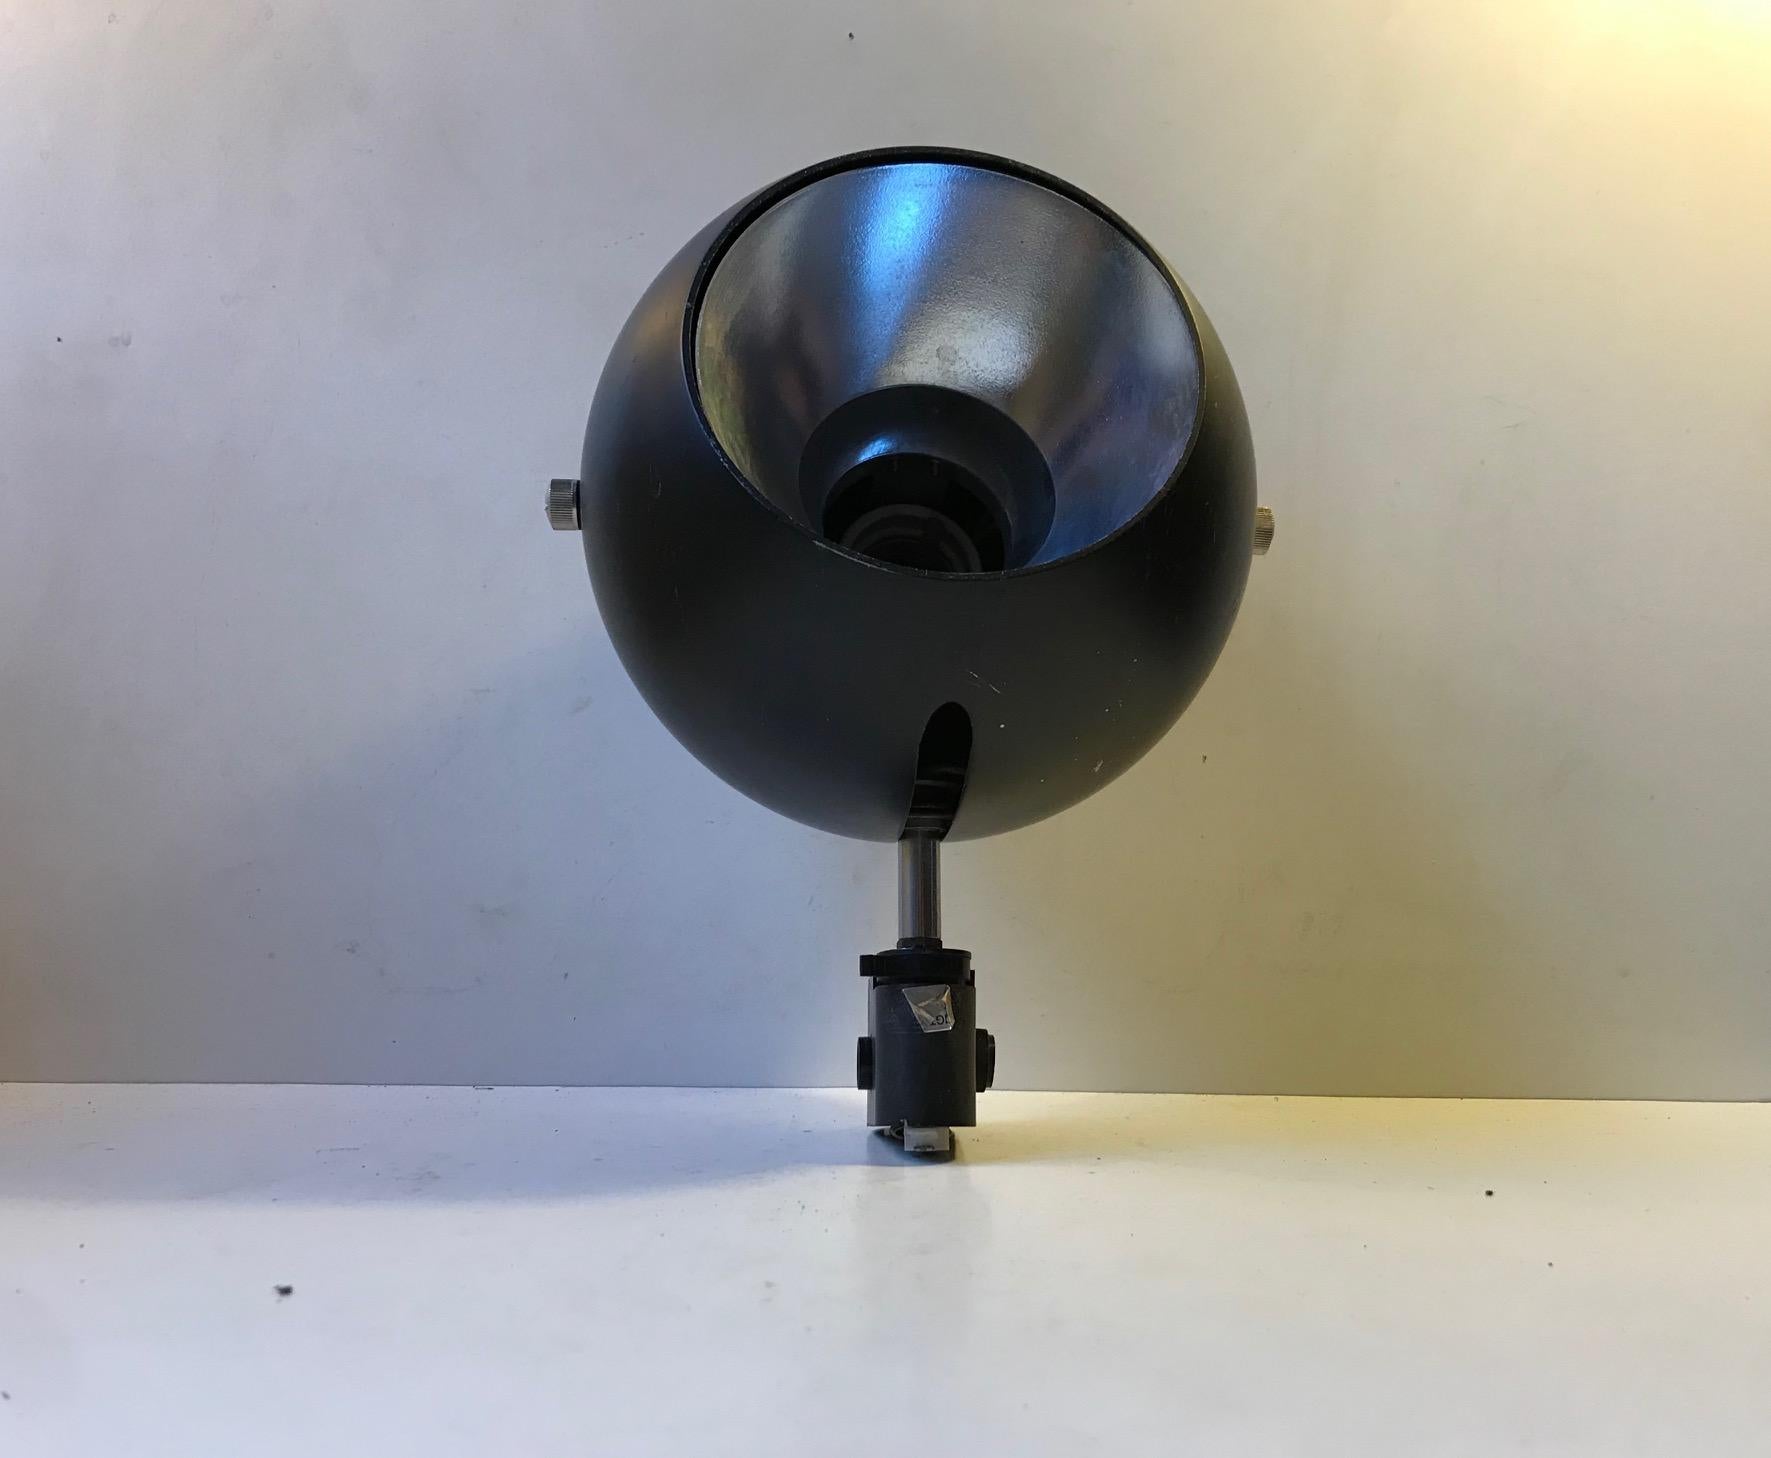 A rare Verner Panton inspired wall or ceiling sconce. Fully adjustable and made from black powder coated steel and aluminium. It is meant to be mounted on a short track and used as a spotlight. It was manufactured and designed in-house at Louis